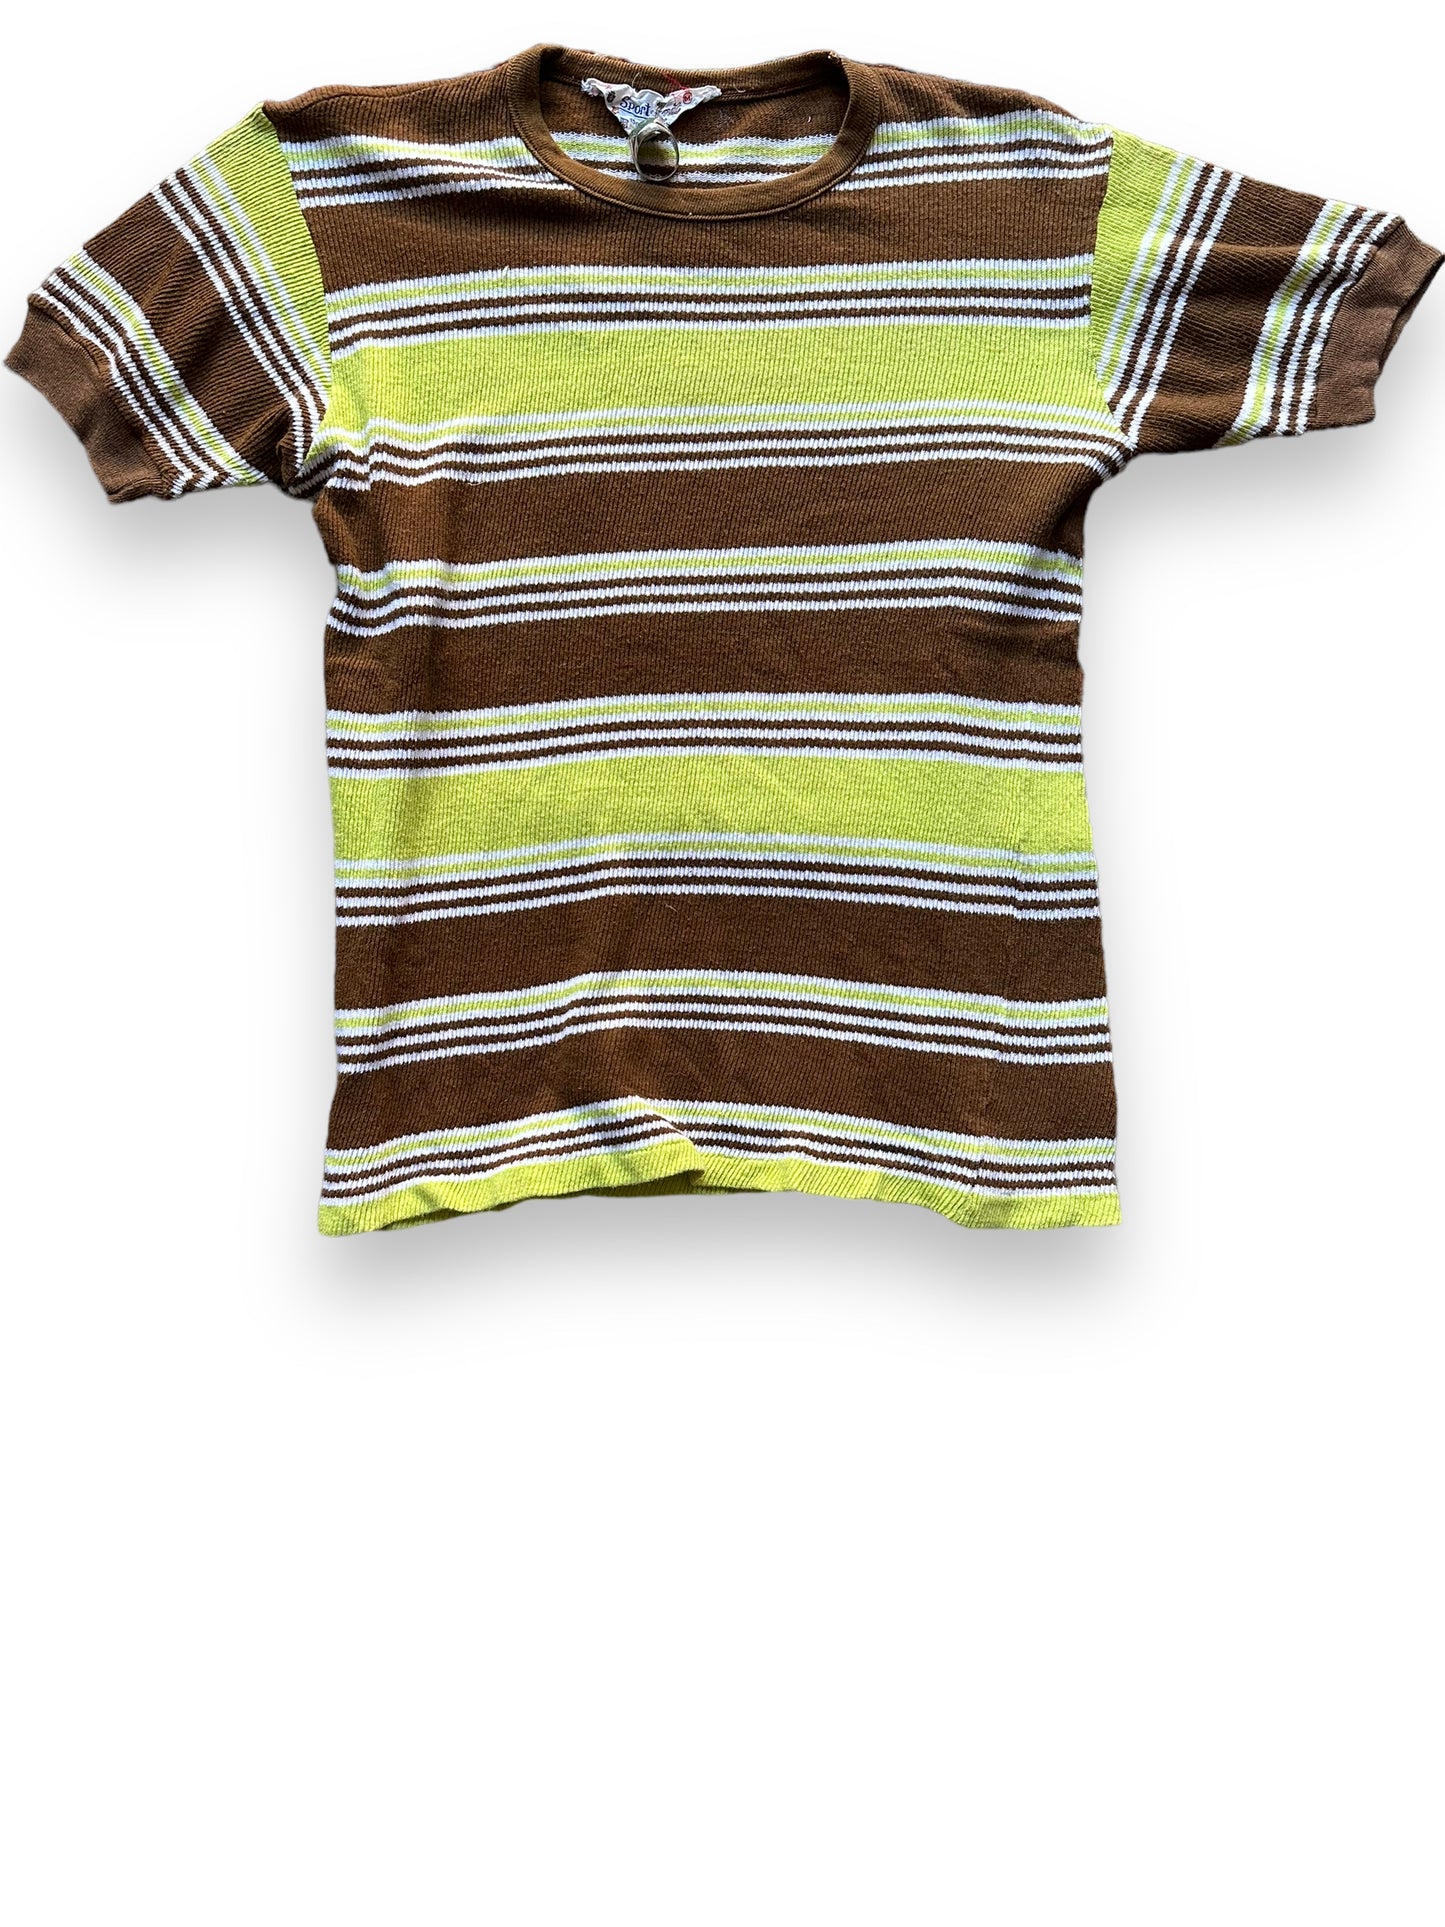 Front View of Vintage Sears Sport Knit Striped Cotton Top SZ M | Vintage Striped Shirts Seattle | Barn Owl Vintage Tees Seattle